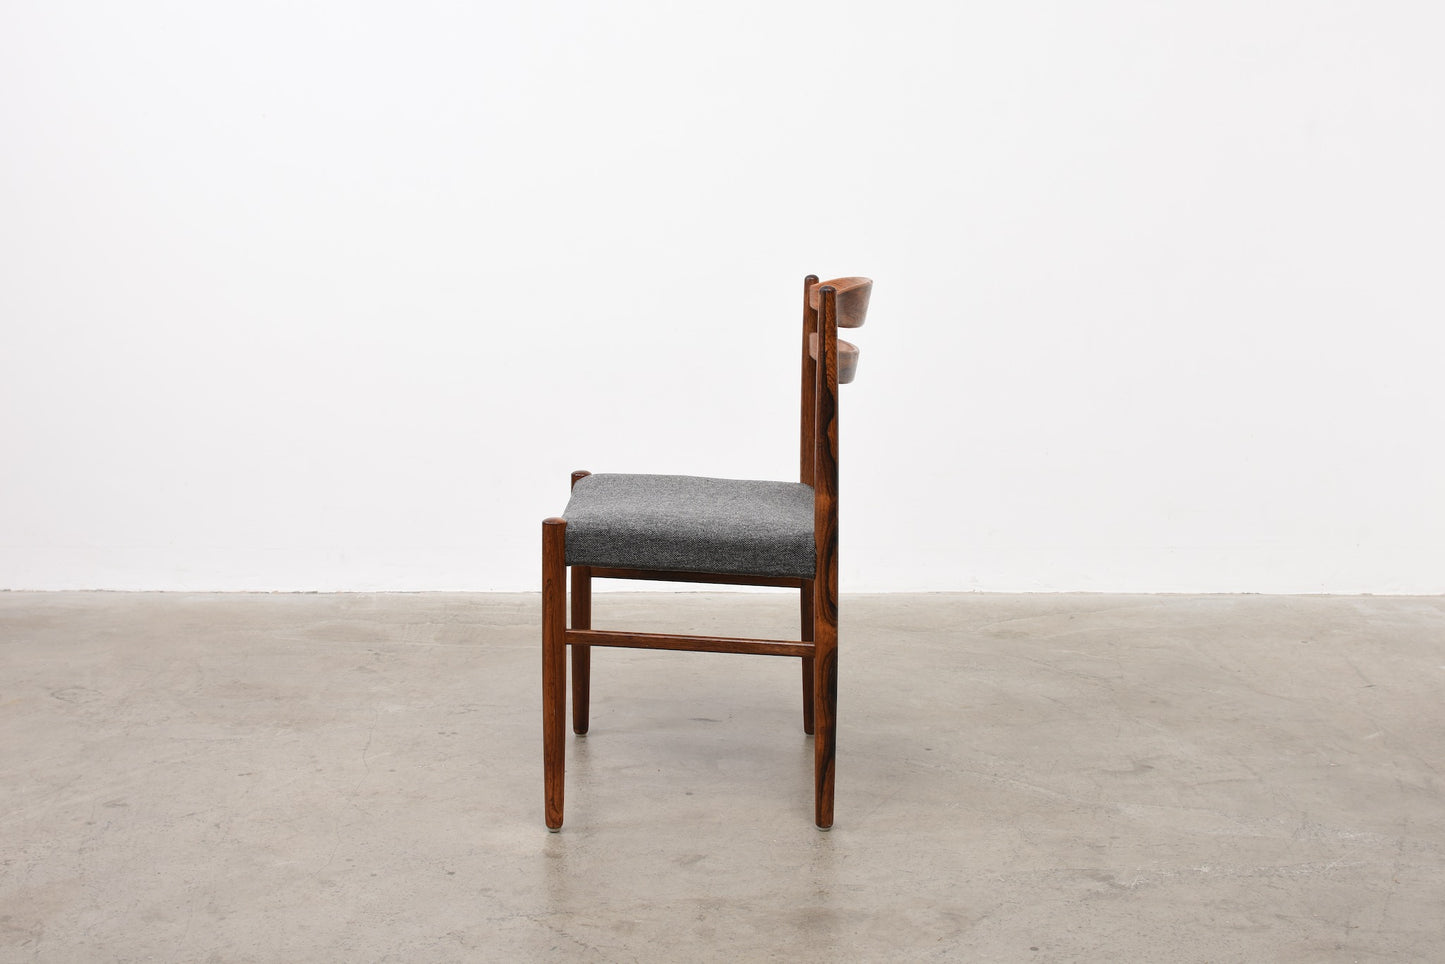 Set of rosewood chairs by Albin Johansson & Söner